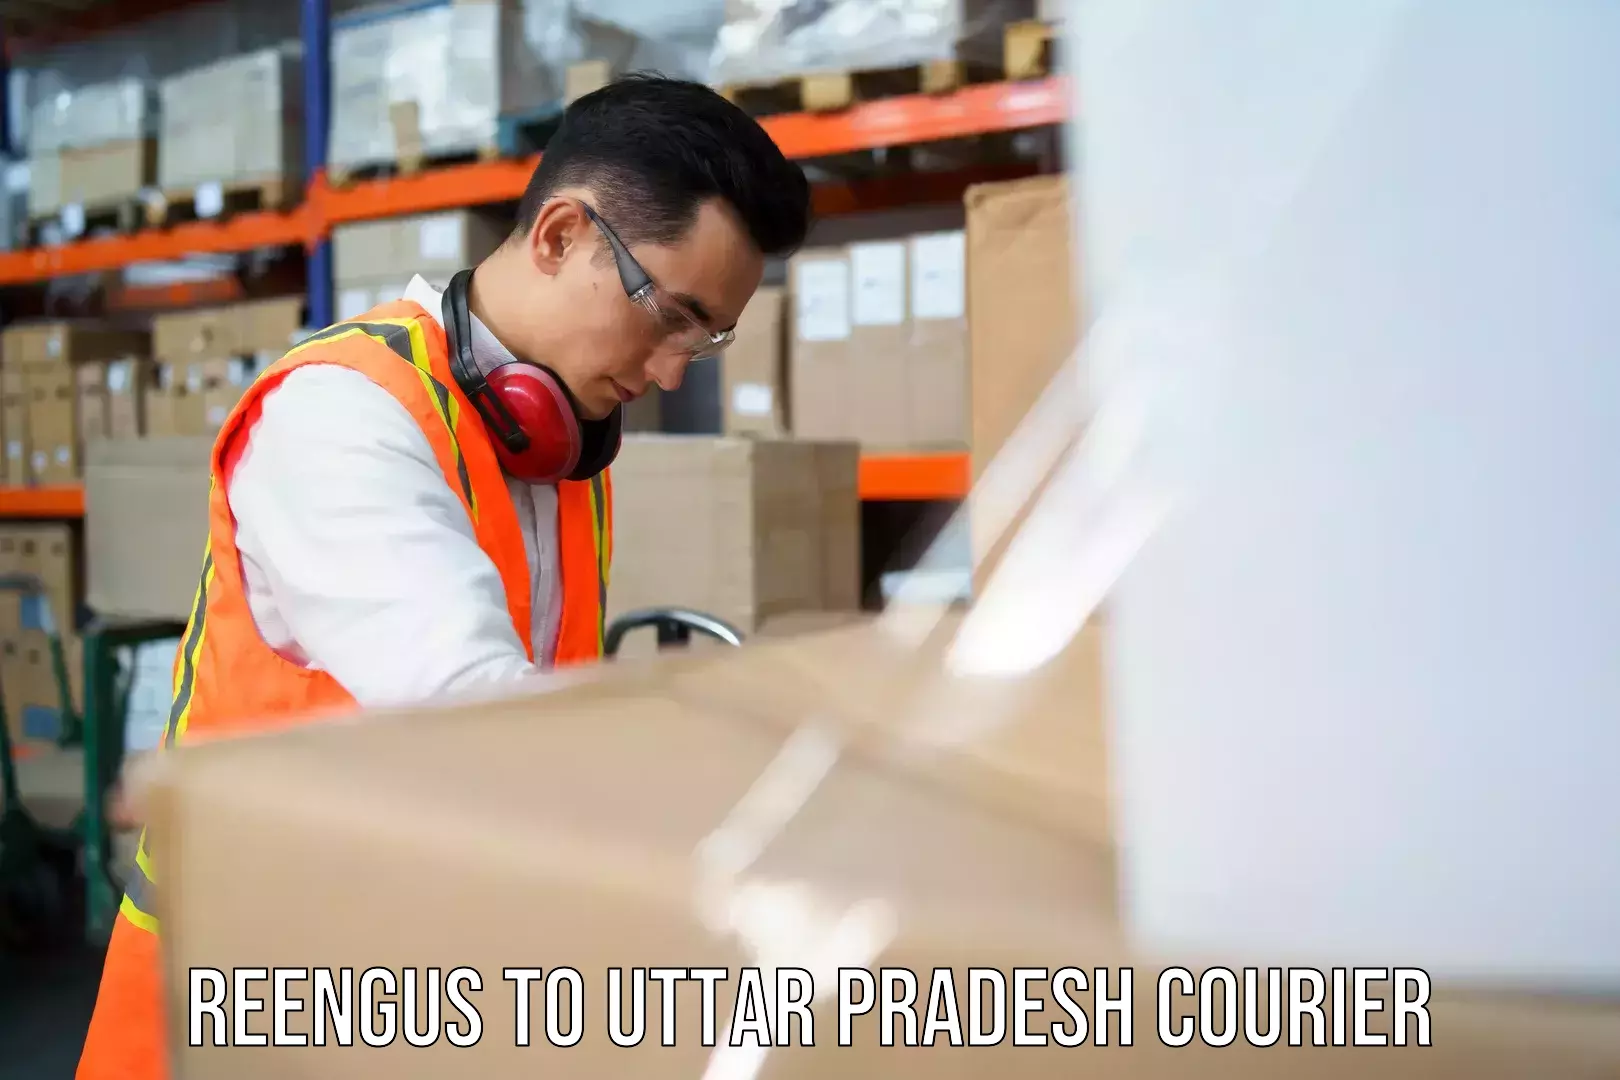 Easy access courier services Reengus to Lucknow